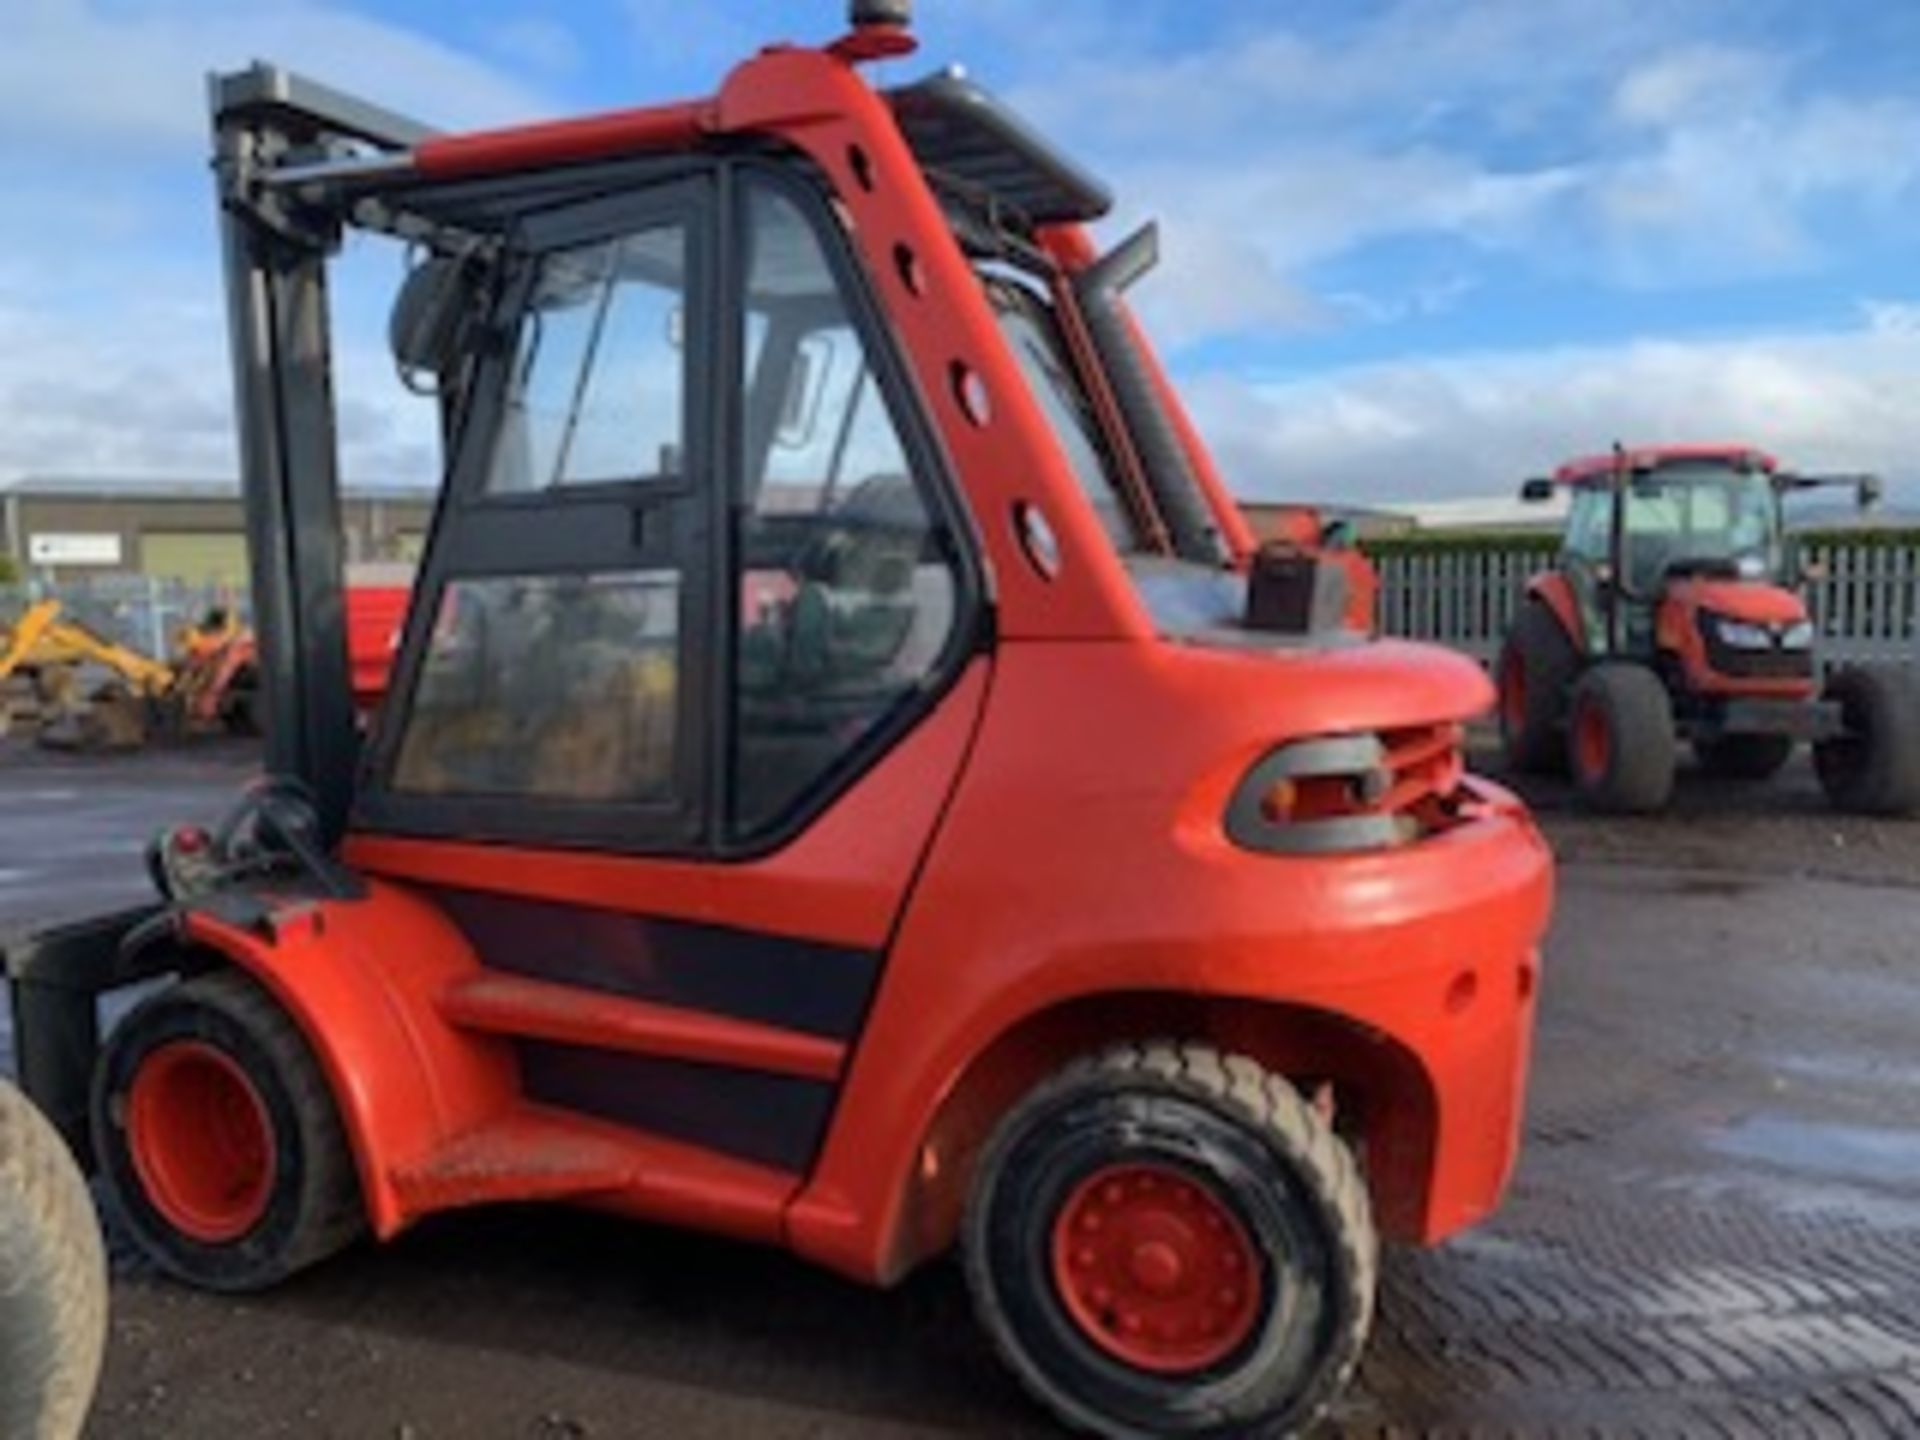 LINDI COUNTERBALANCE FORKLIFT 2004 -- 11154HRS (NOT VERIFIED) MODEL - H70D-02 SN - E18353R00087 - Image 4 of 8